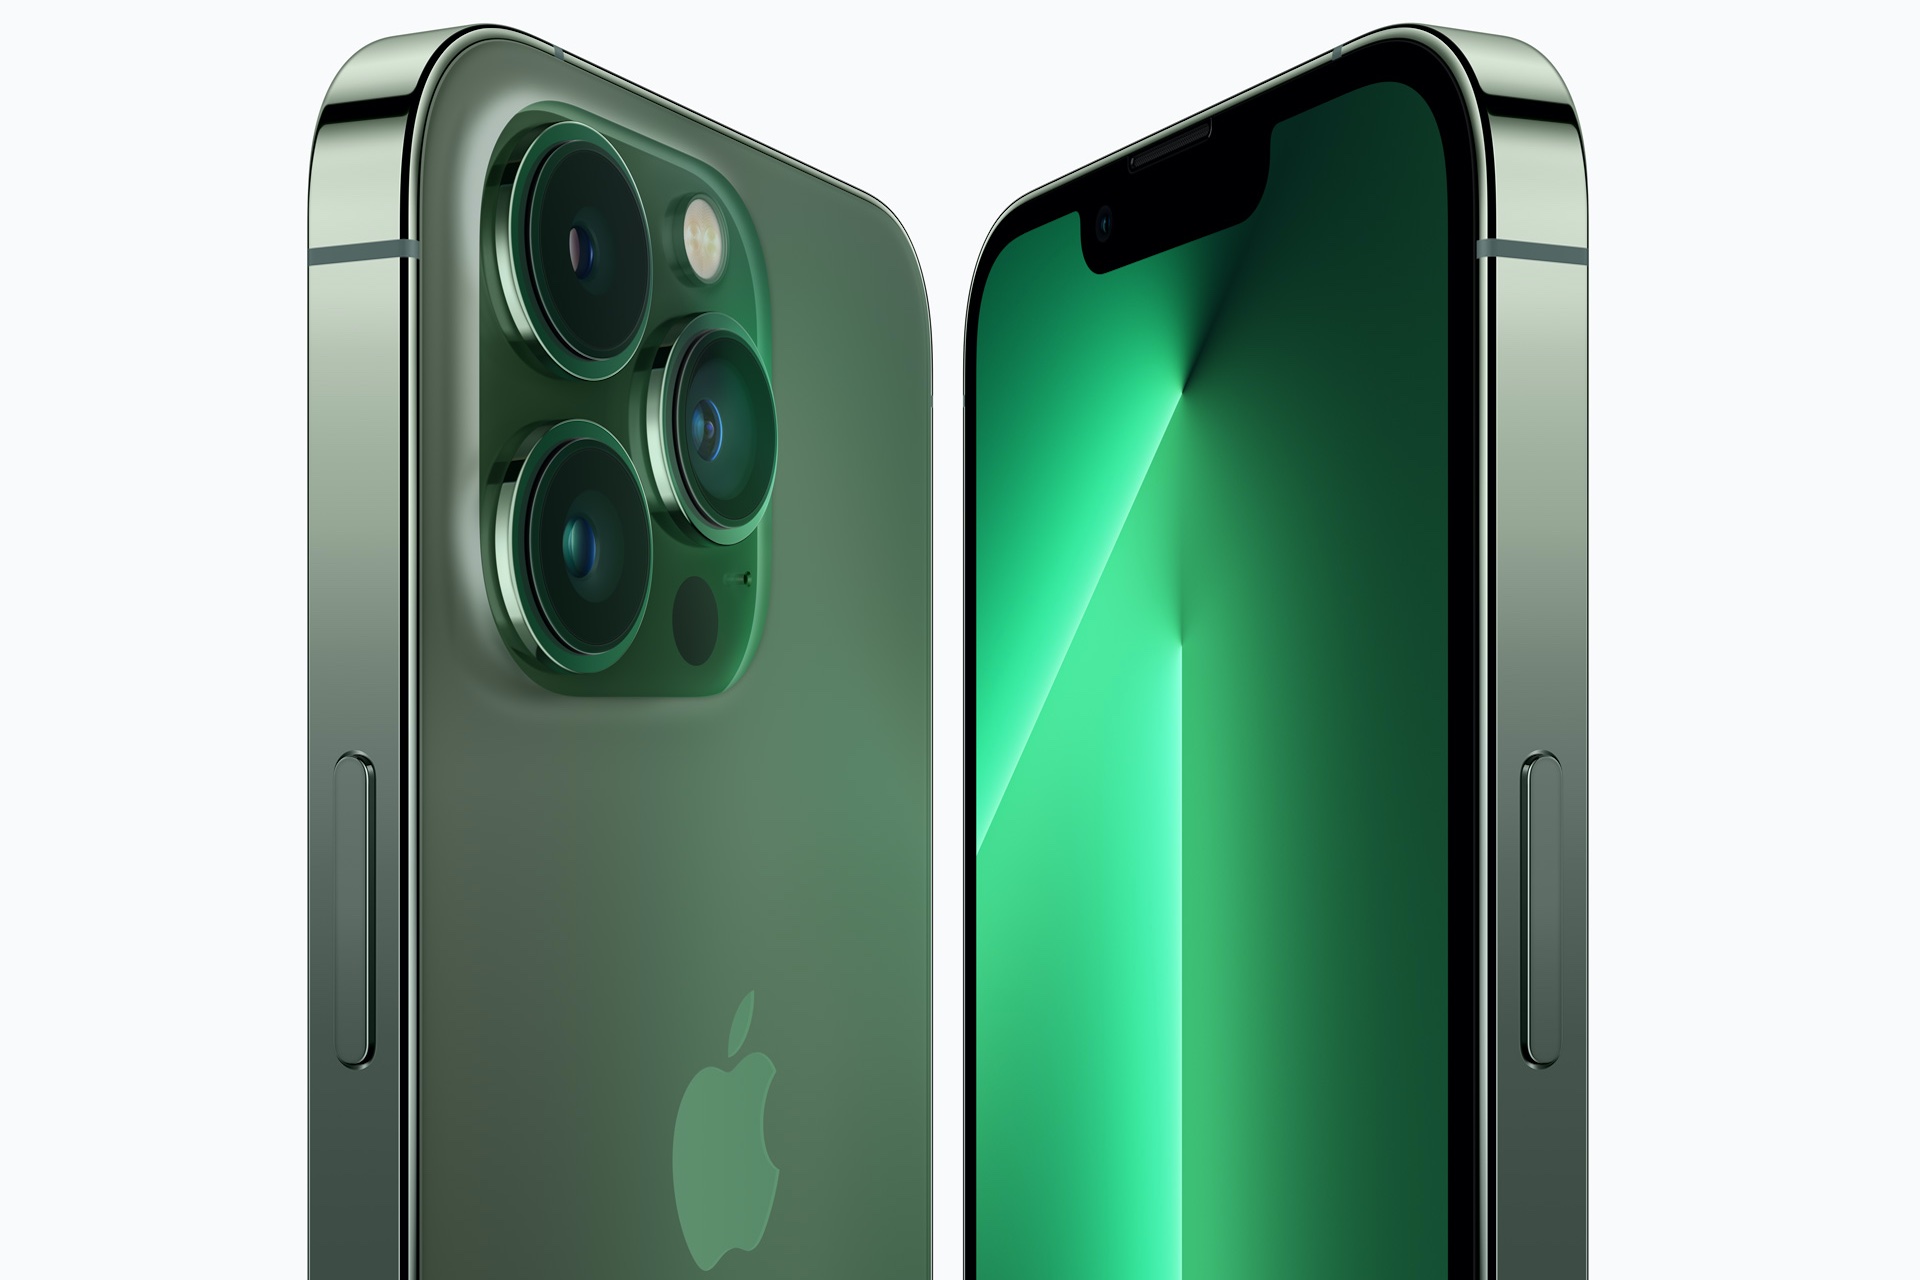 The iPhone 13 and iPhone 13 Pro now in stunning green finishes - Bengal